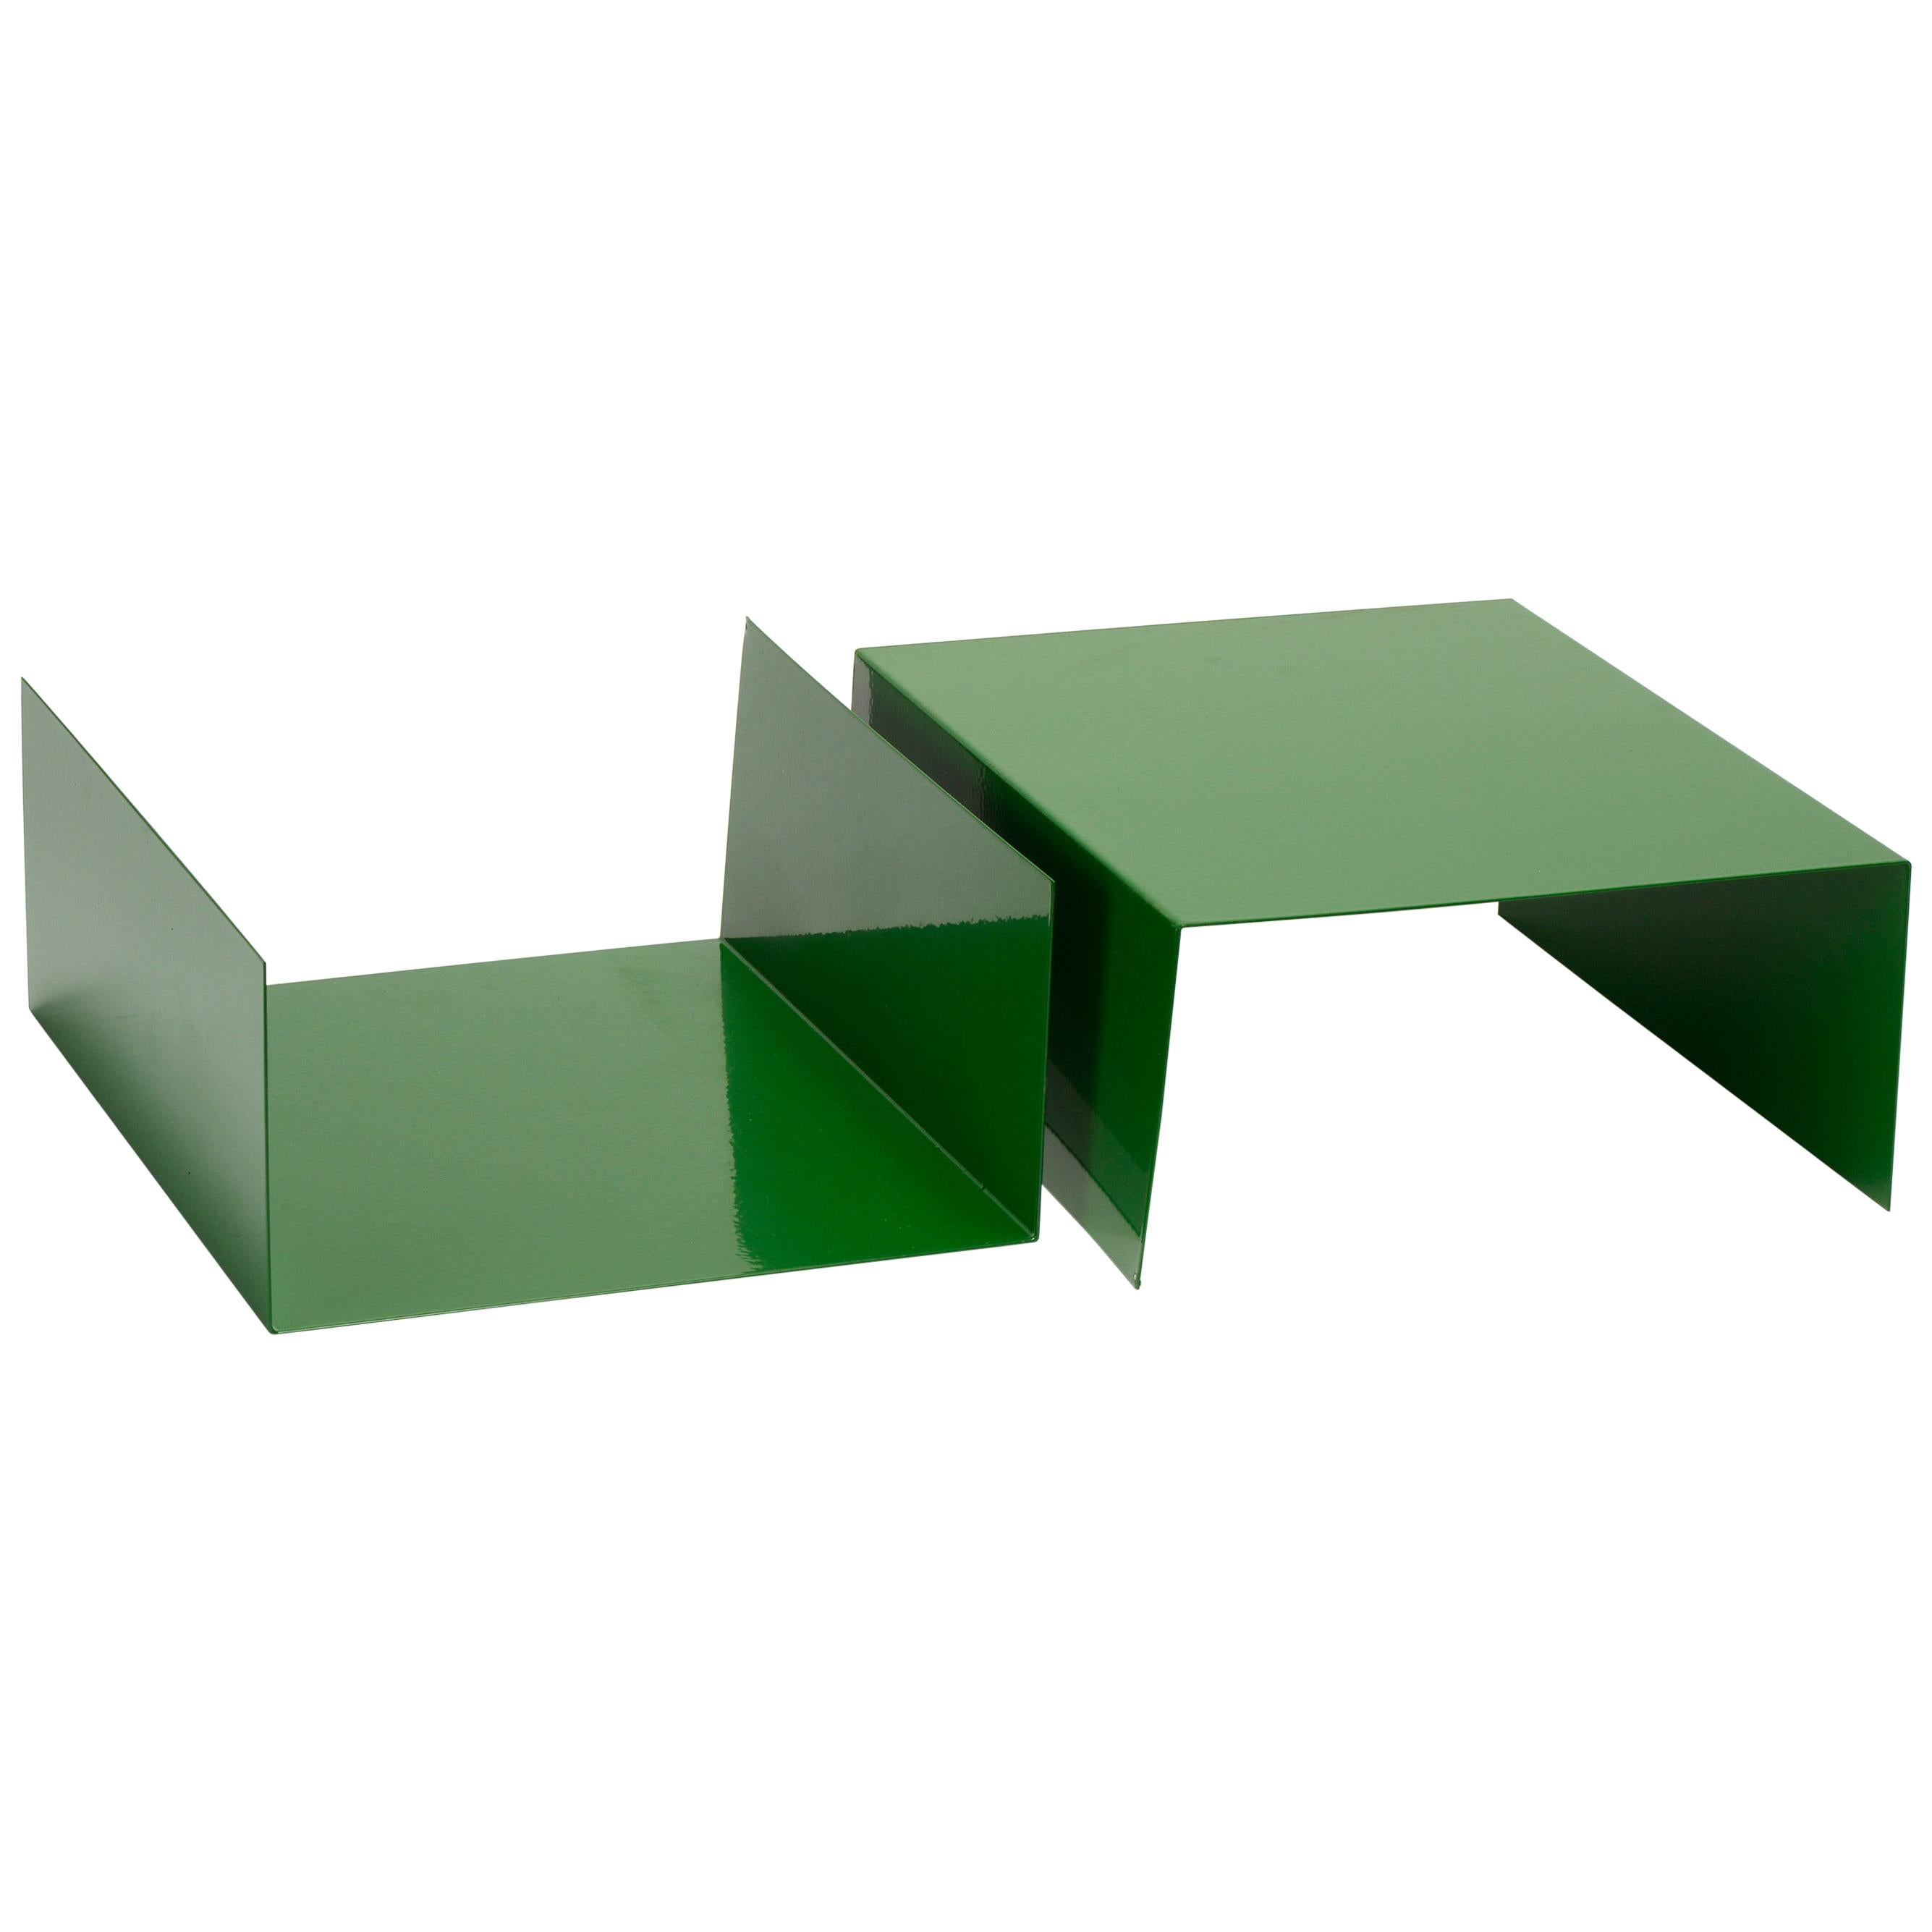 Pair of 1960s Aluminum Paper Trays or Bookends Refinished in Kelly Green For Sale